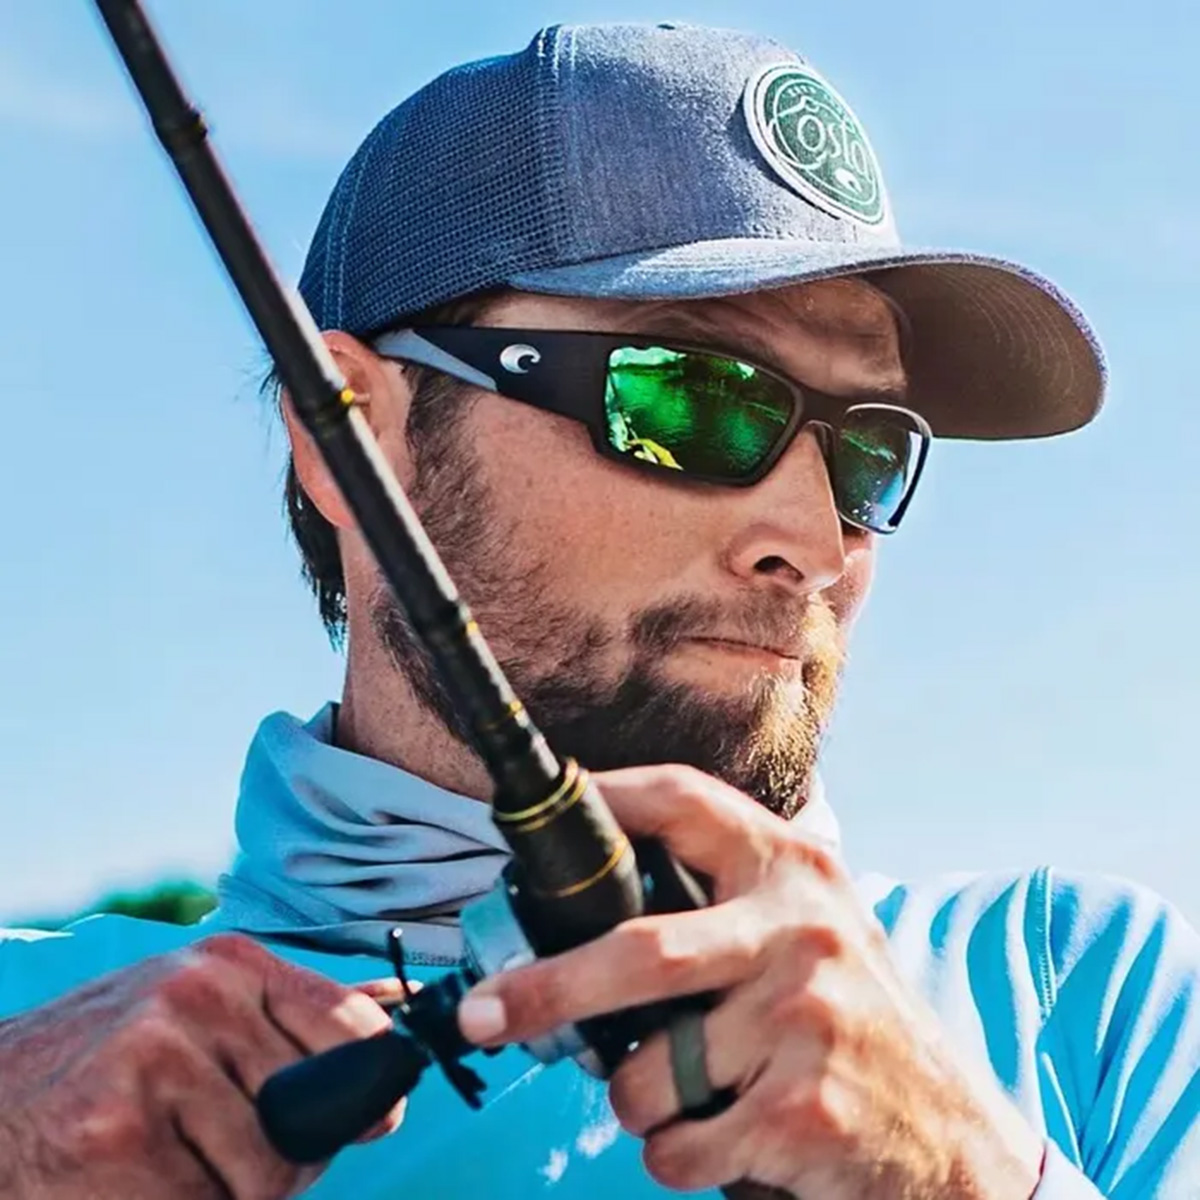 New @CostaSunglasses in stock now 👇 🌞 farlows.co.uk/costa-pro-seri… 🌞farlows.co.uk/costa-pro-seri… #farlows #costa #newin #costasunglasses #sunglasses